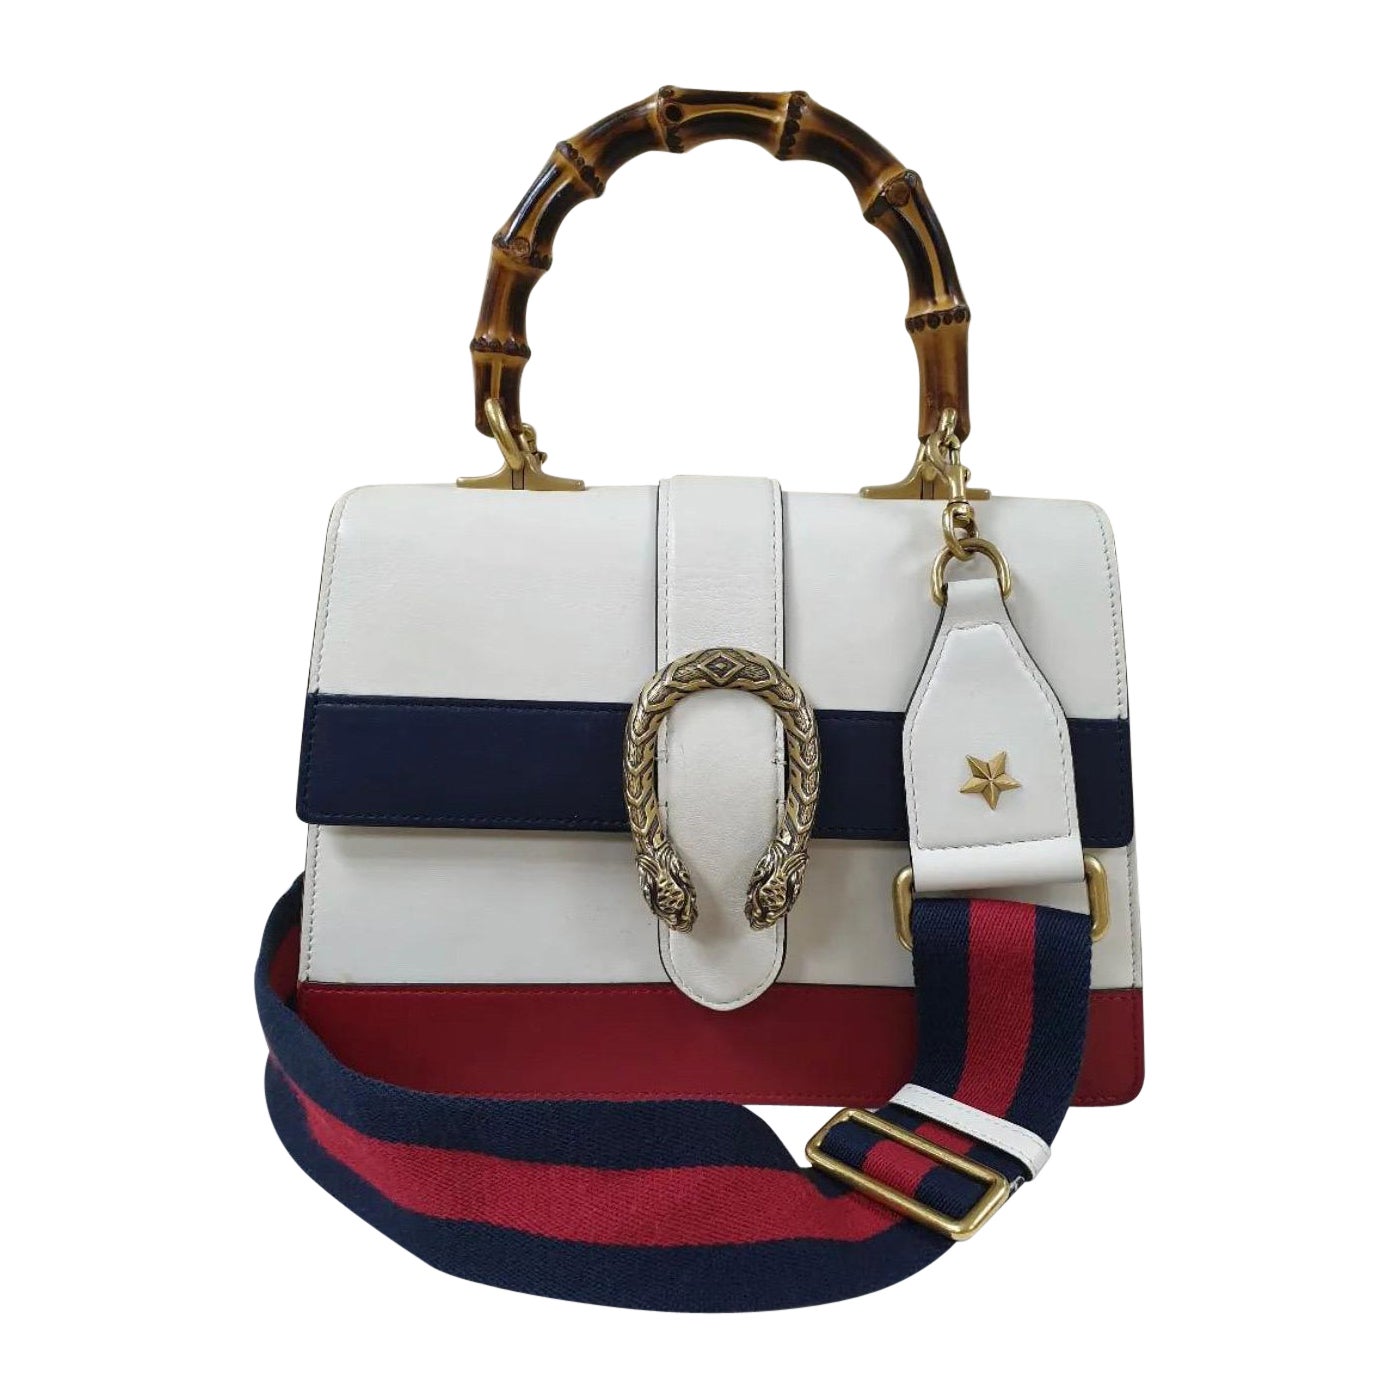 Gucci White, Red and Blue Leather Dionysus Bamboo Top Handle Gold Hardware, White/Red/Blue Womens Handbag